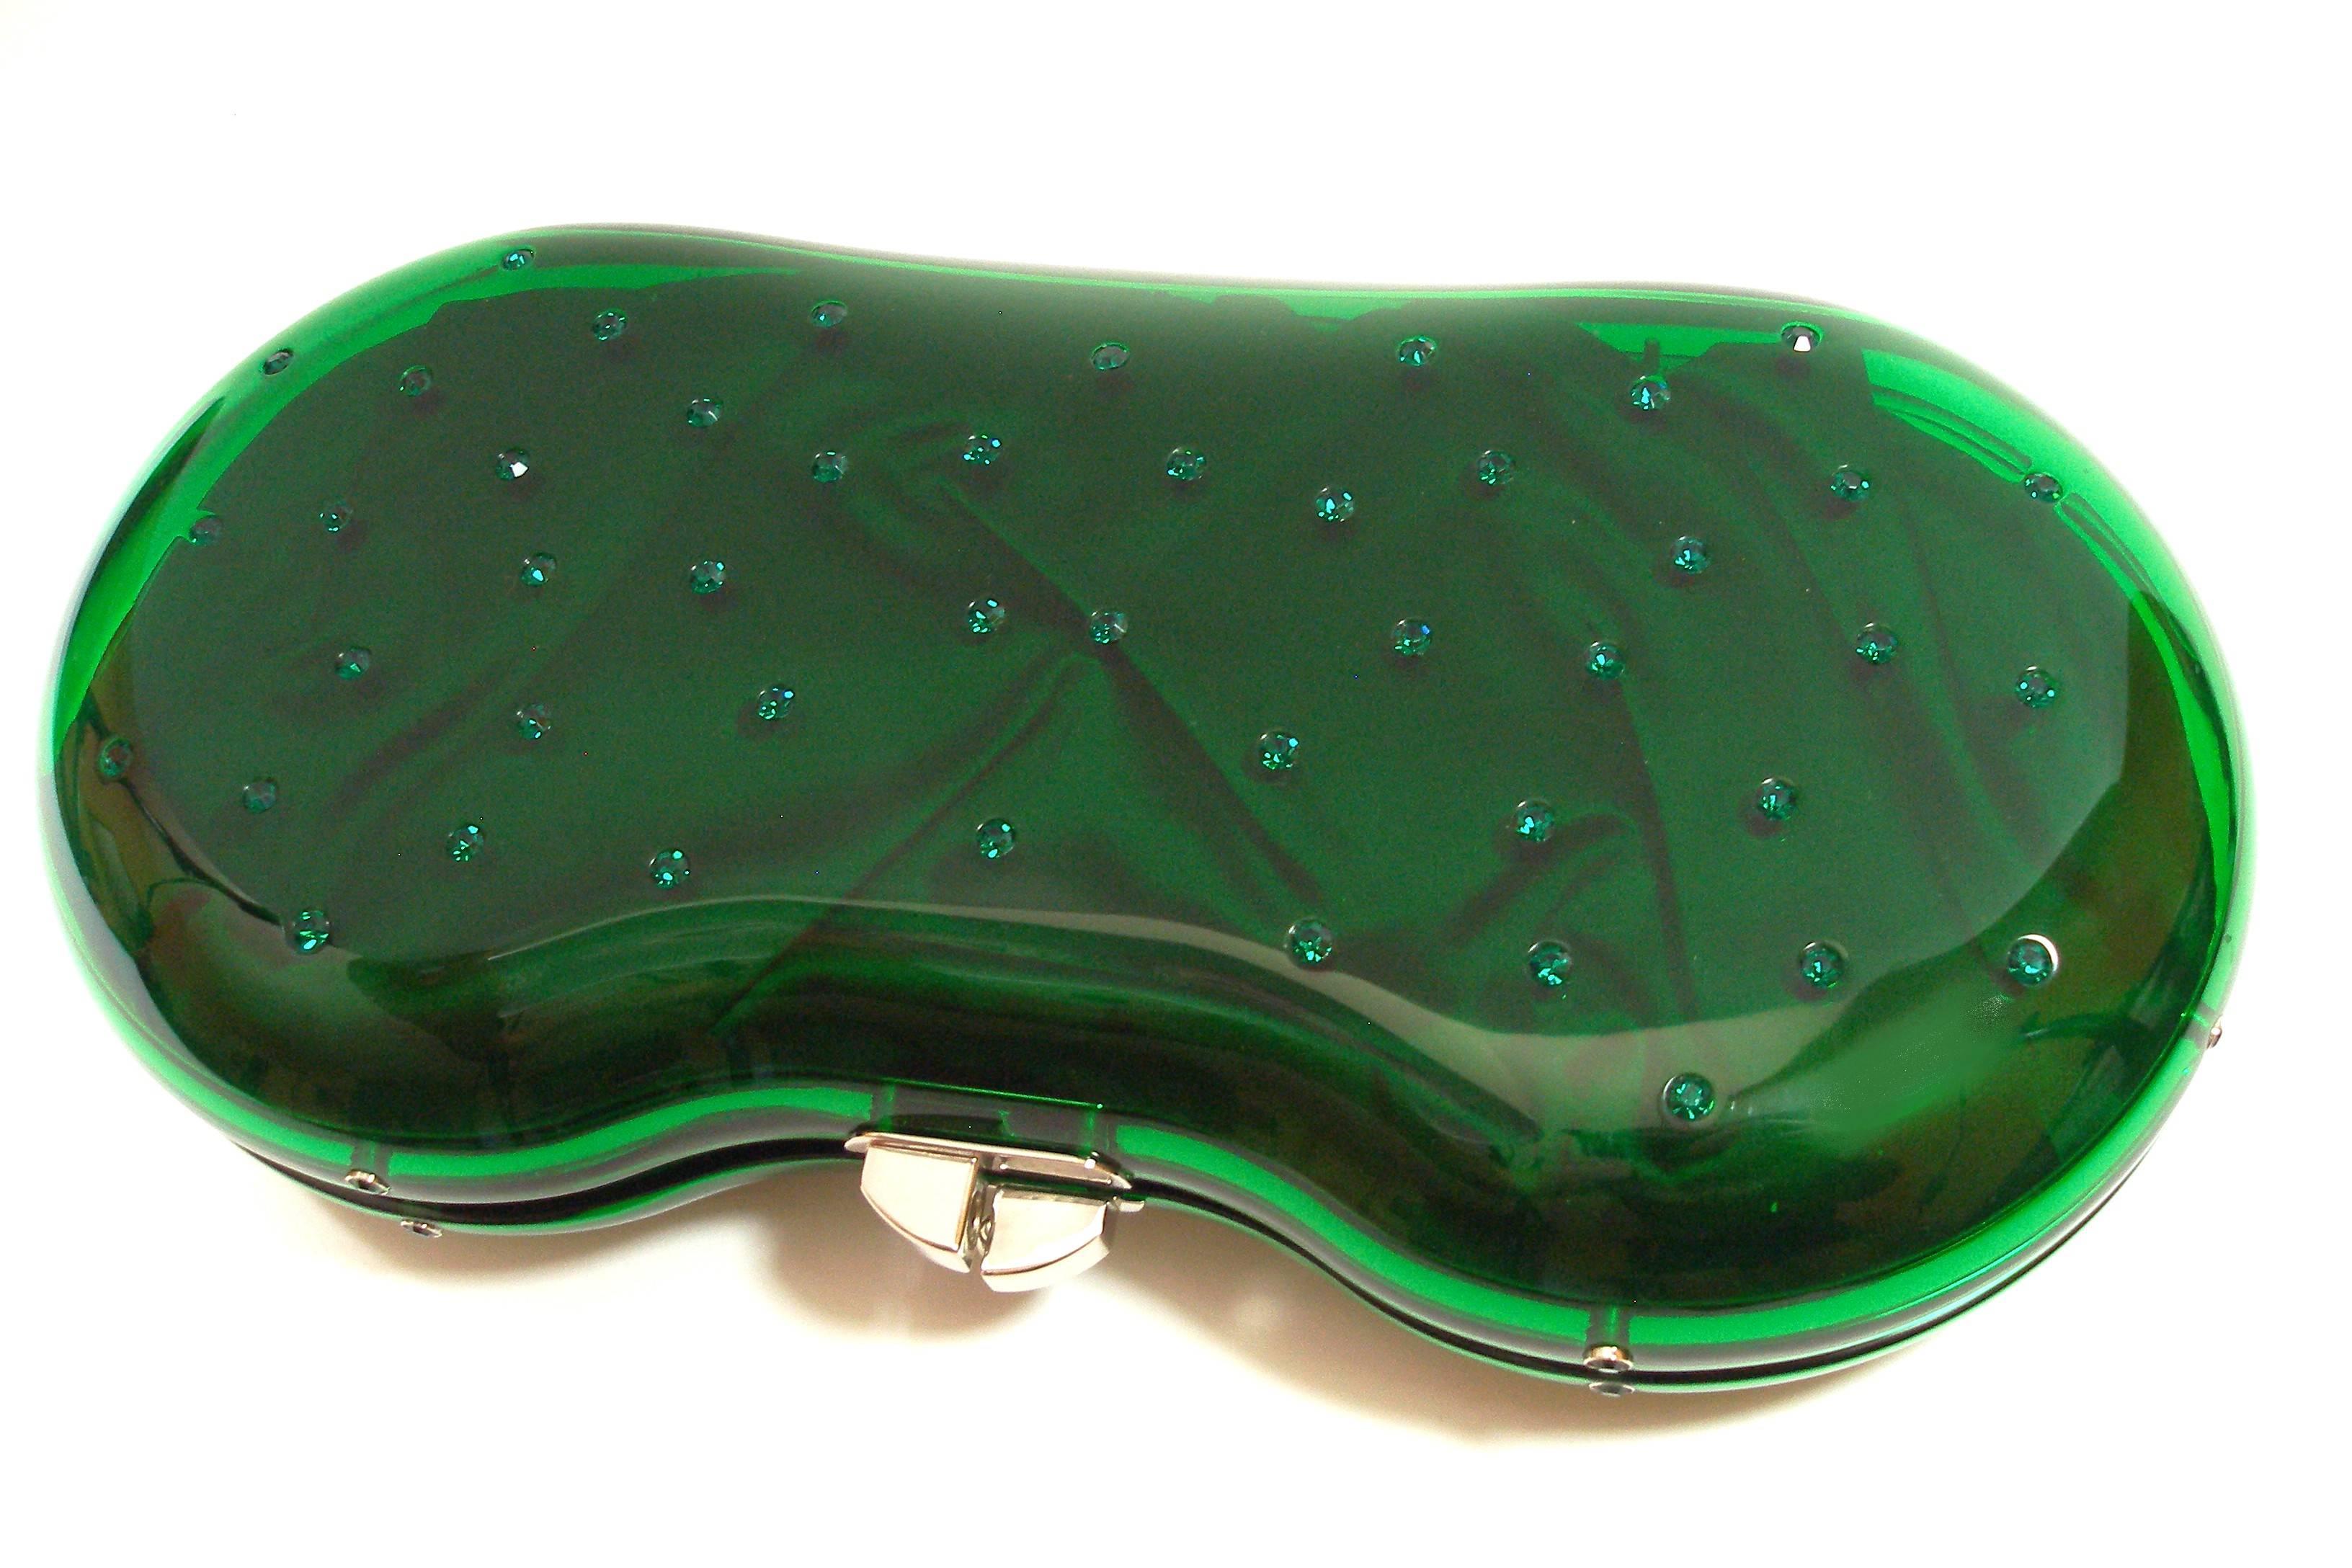 Women's FANTASTIC & COLLECTIBLE Tom Ford for YSL Green lucite clutch with crystals 